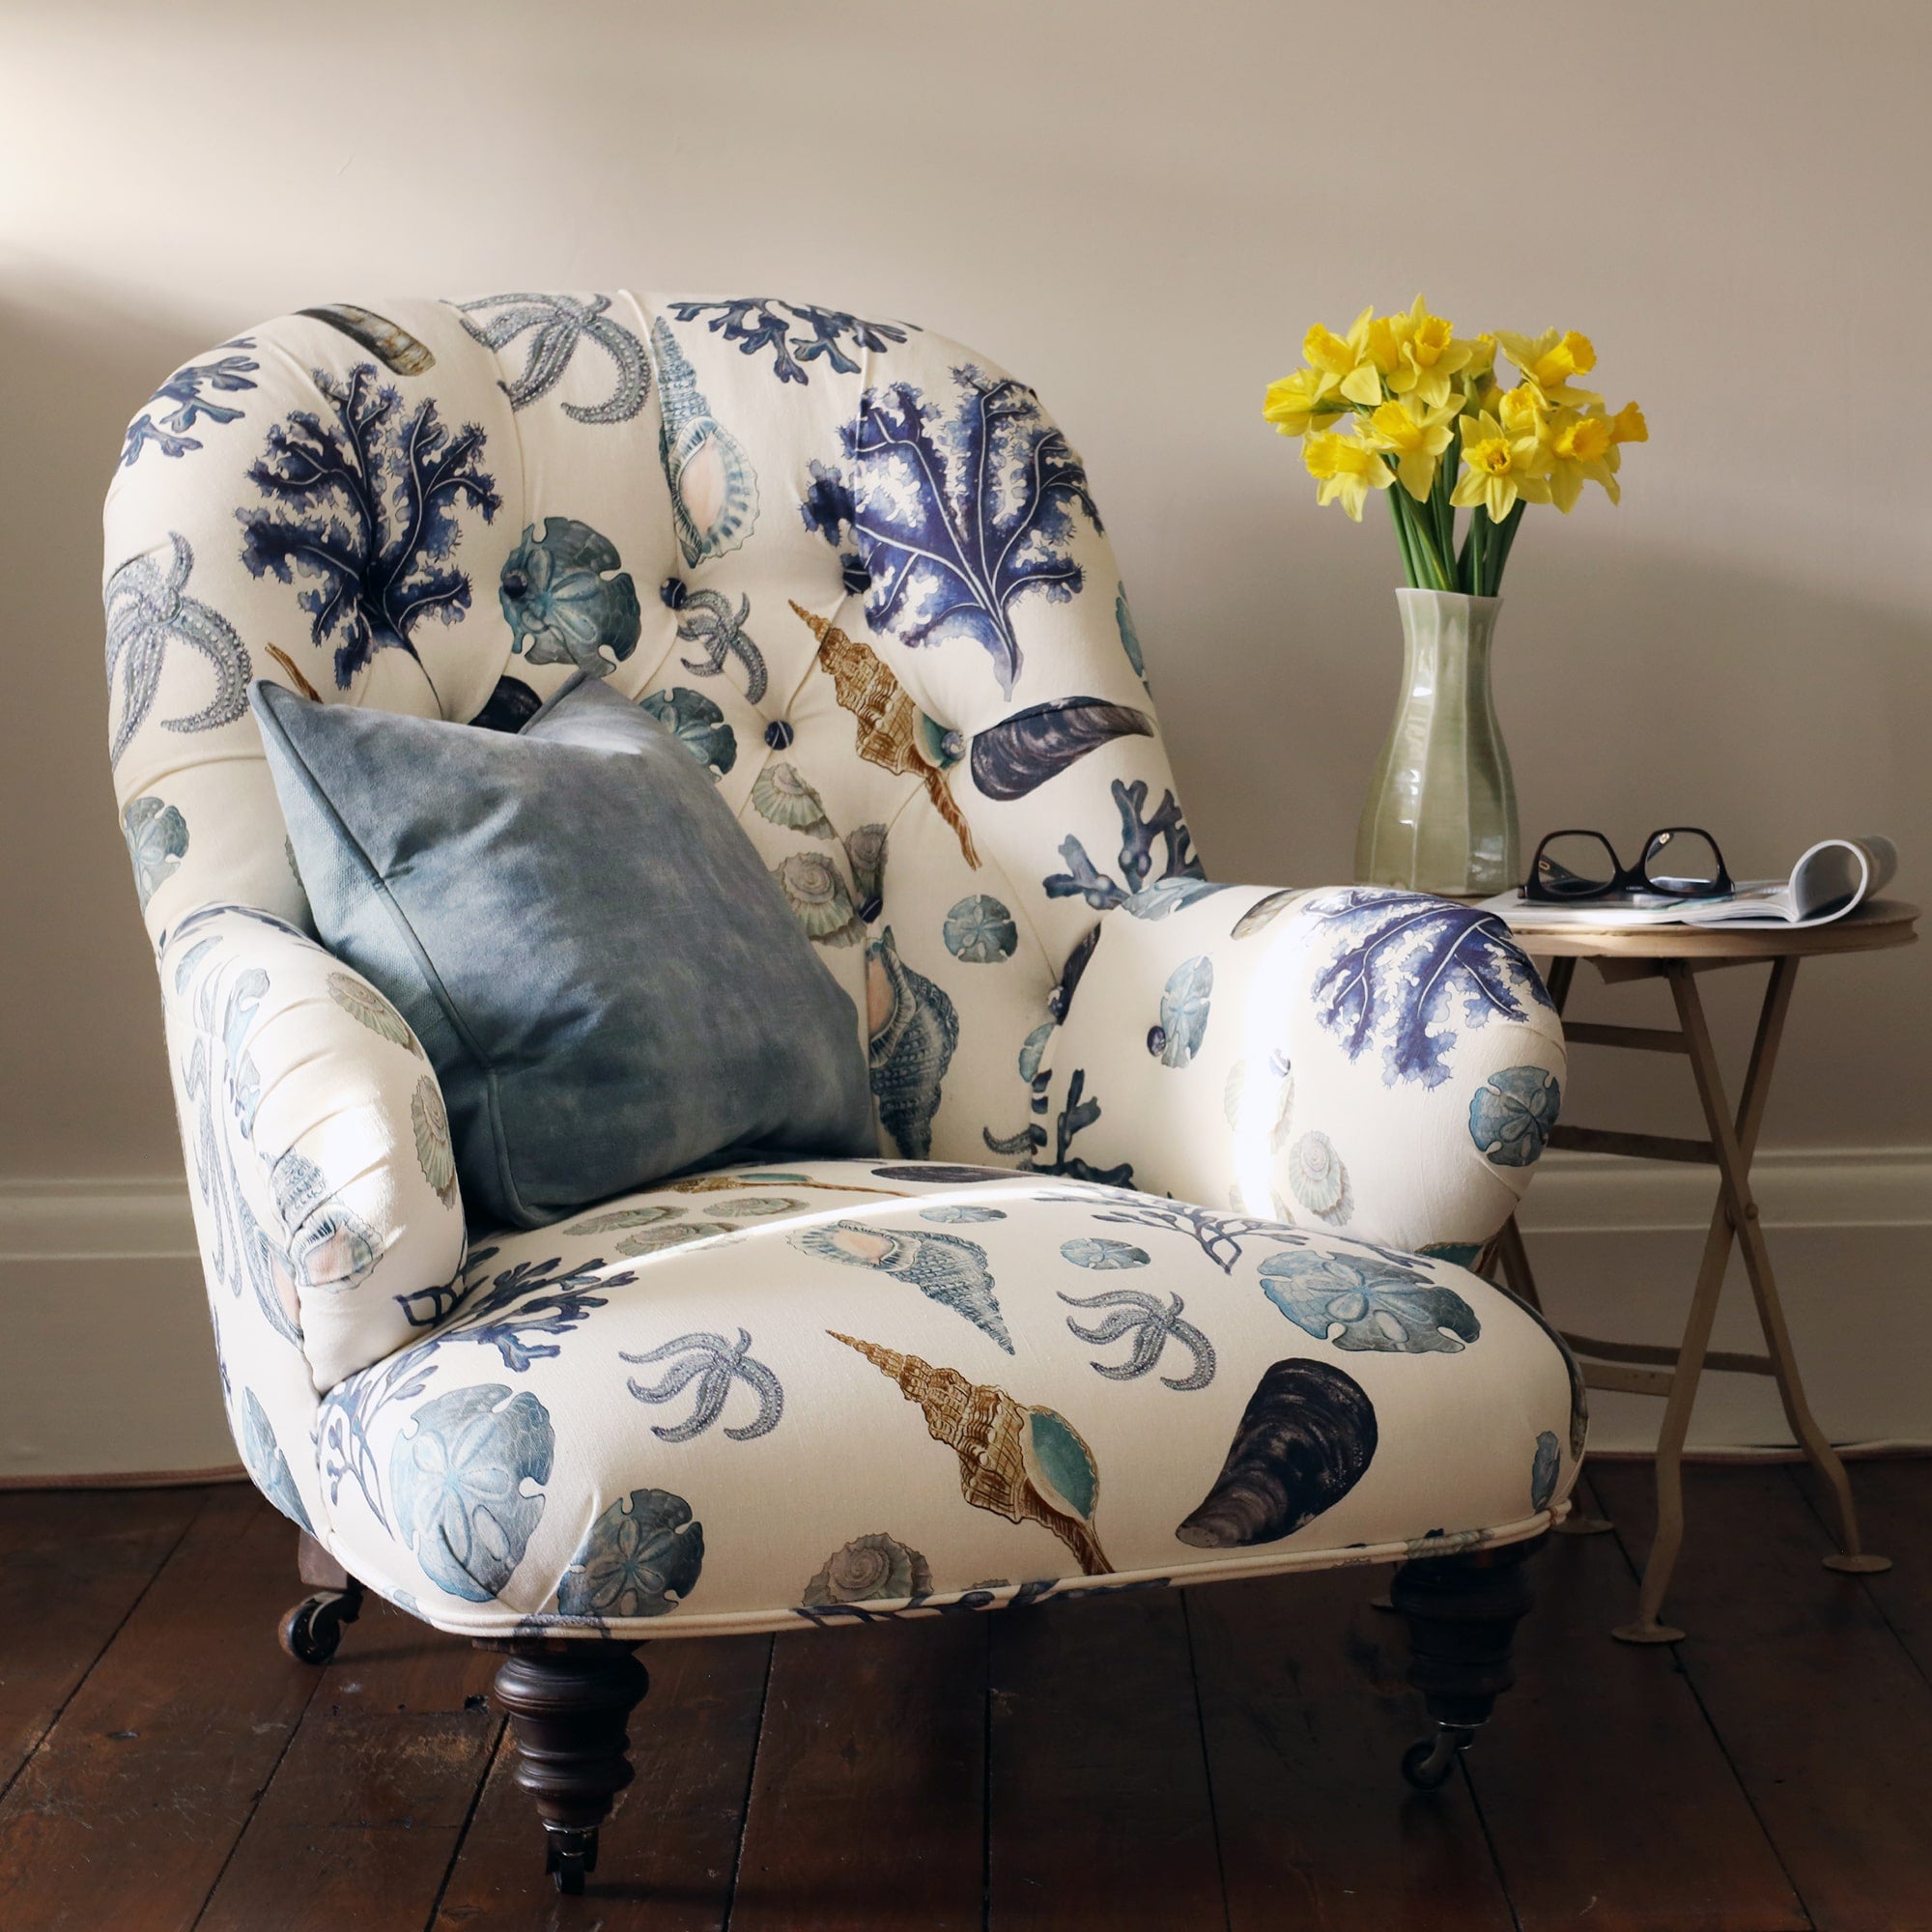 Front view of a re upholstered victorian button back armchair covered in a shell and seaweed fabric in blue tones on an off white background. The chair is sitting next to a small fold up table that has a vase of bright yellow daffodils, a folded magazine and a pair of reading glasses on it.